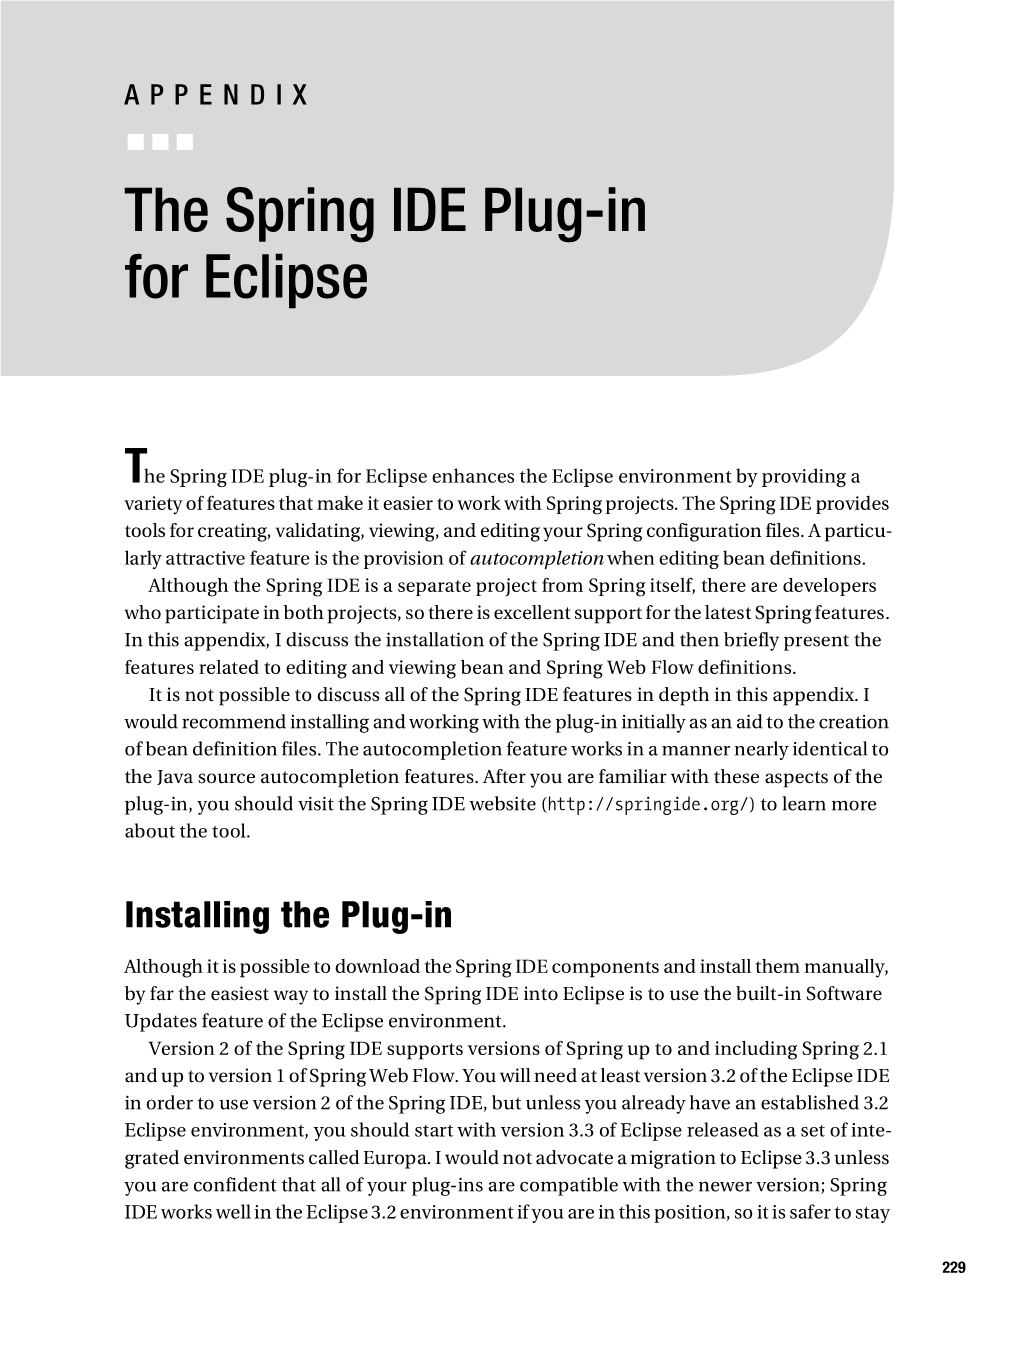 The Spring IDE Plug-In for Eclipse